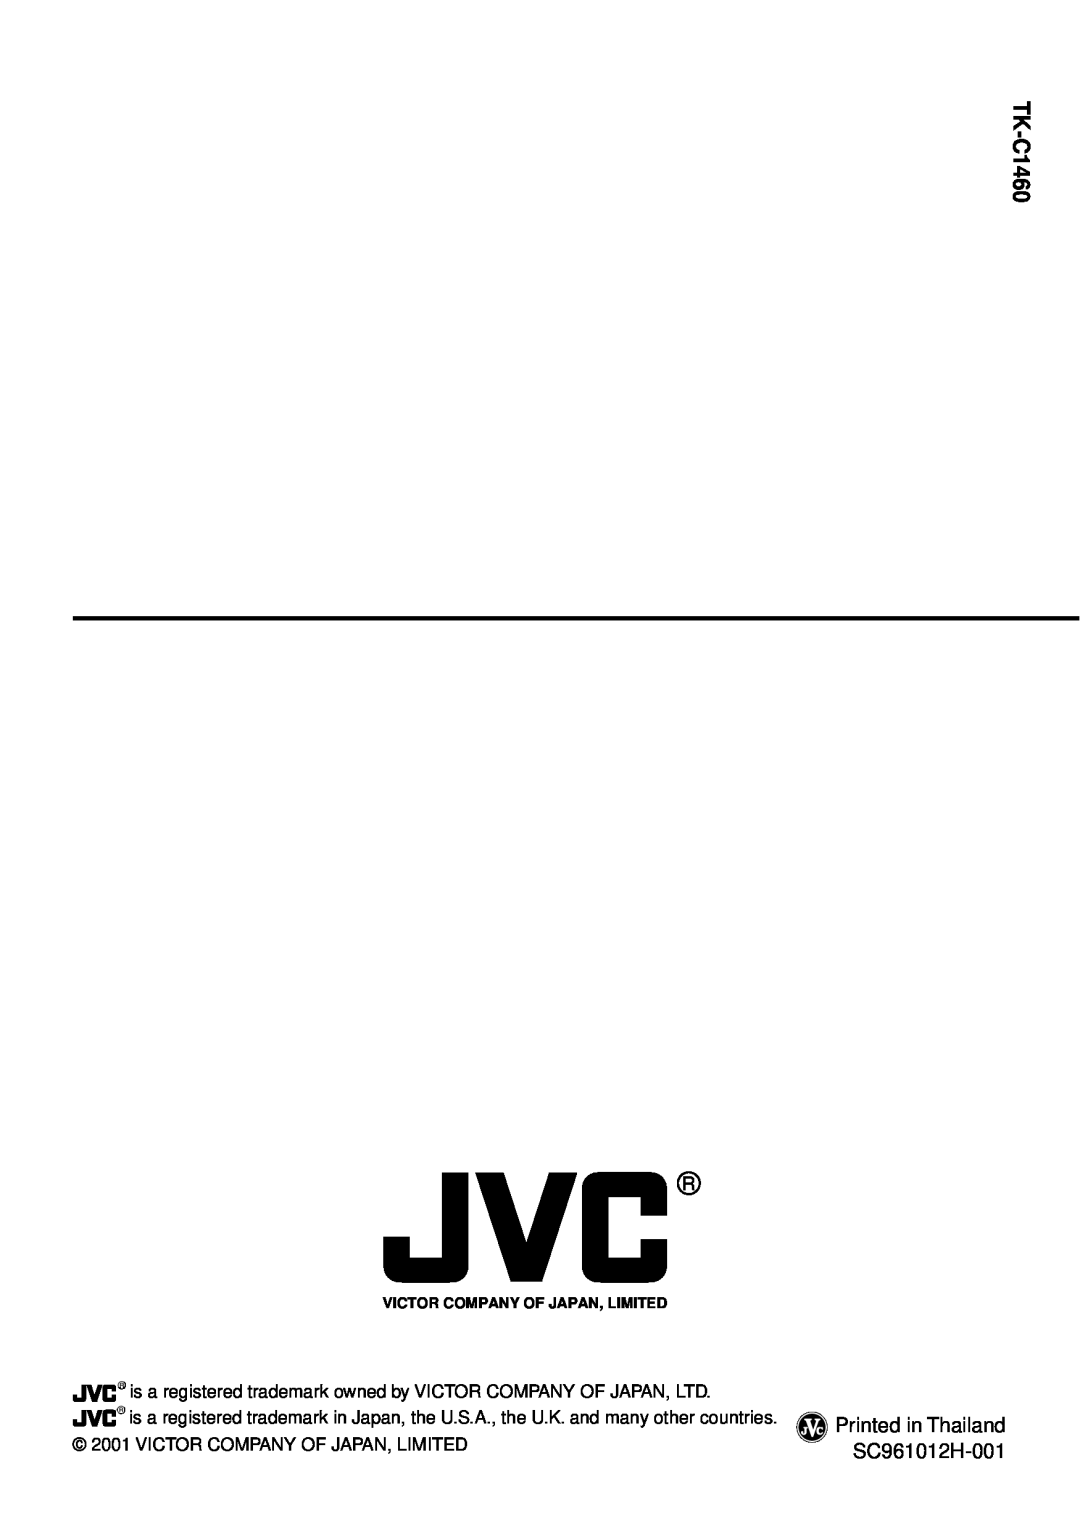 JVC TK-C1460 manual Printed in Thailand, SC961012H-001, Victor Company Of Japan, Limited 